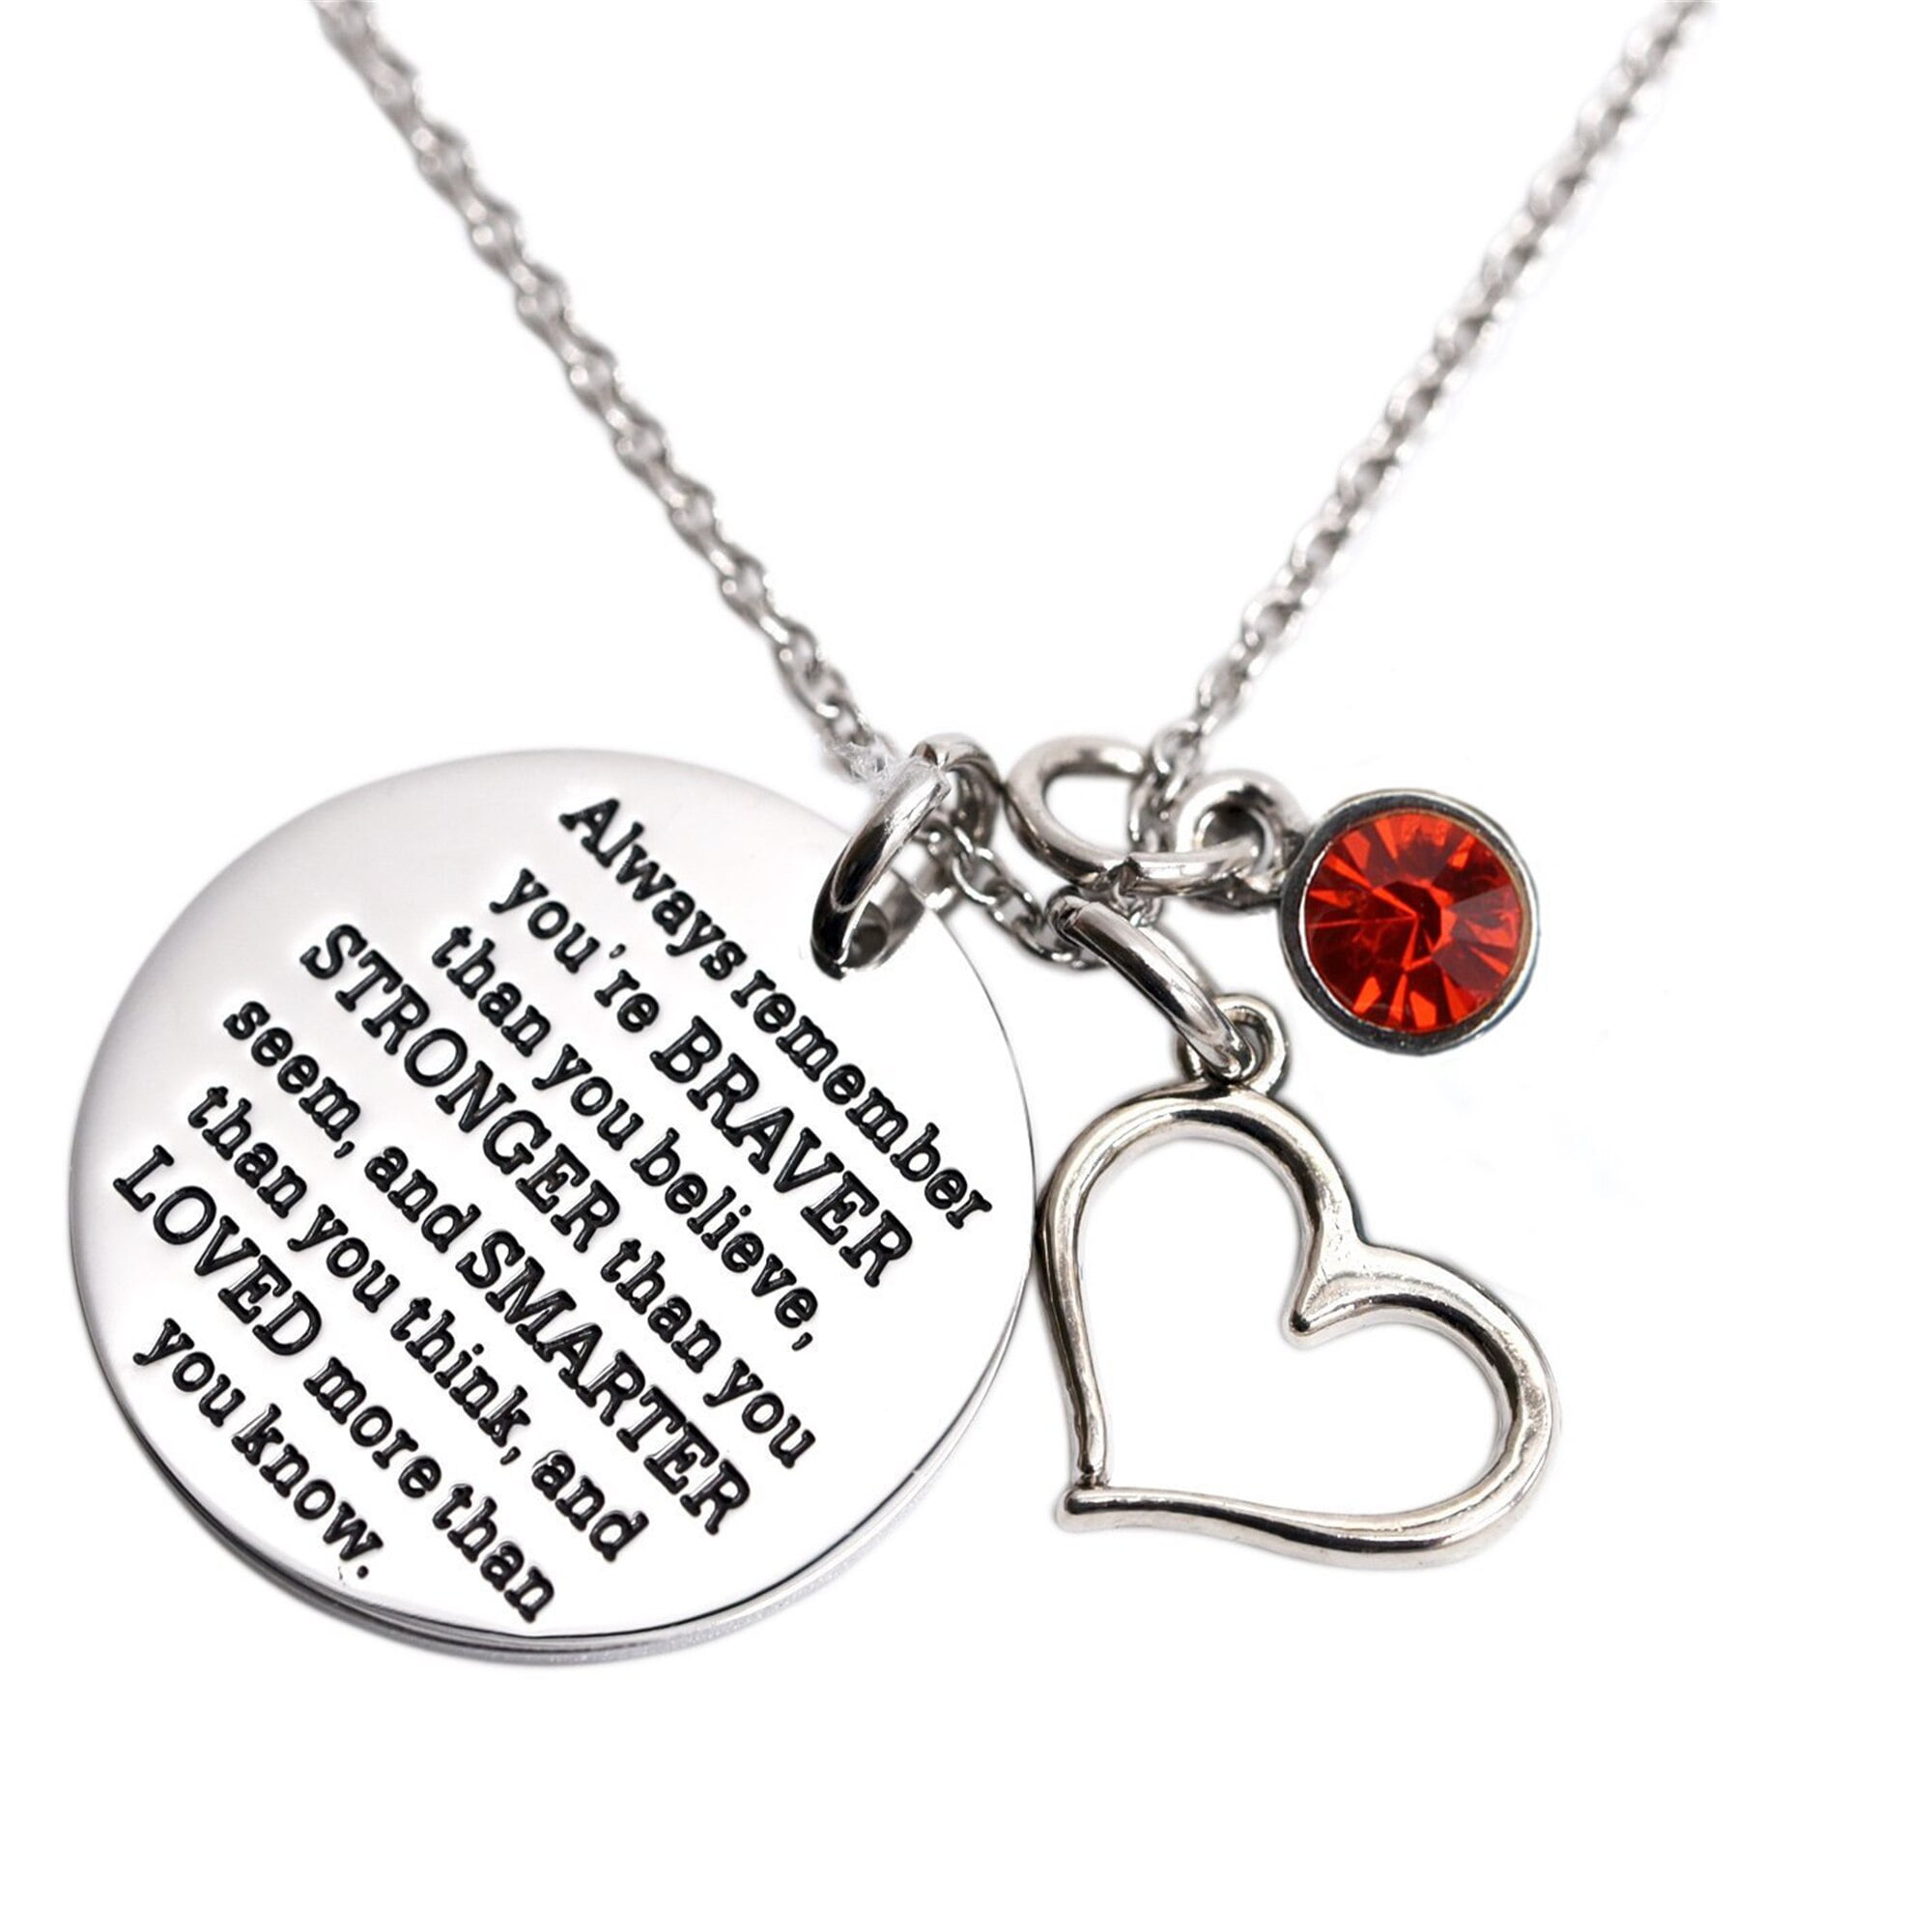 Love Husband Braver Than Believe Stronger Than Seem Smarter Than Think Loved Than Know to My Eboni Always Remember That I Love You Wife Valentine Gift Birthday Gift Necklace Name